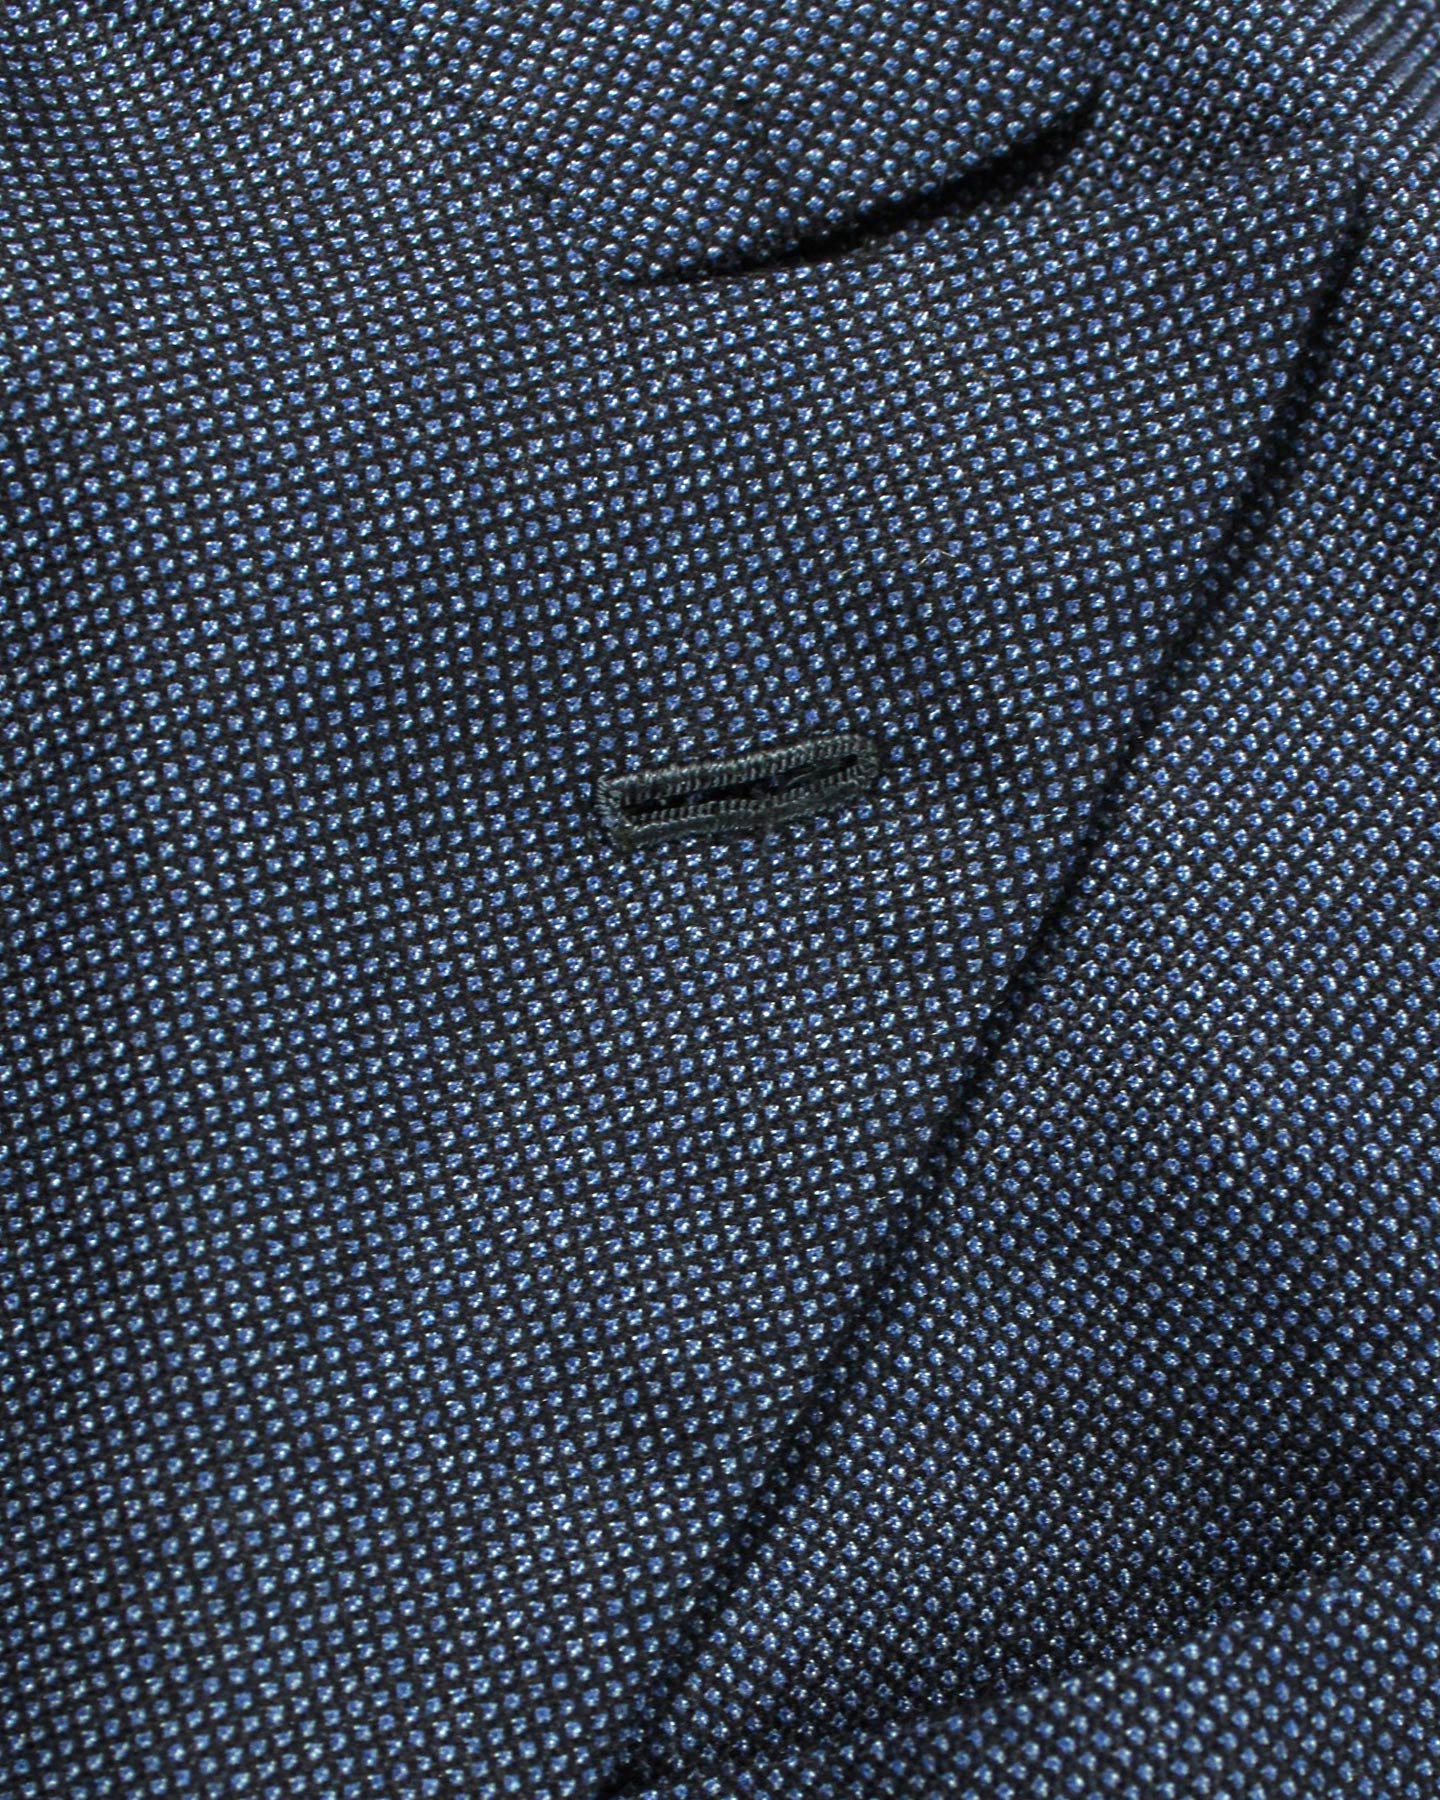 Kiton Cashmere Suit Dark Blue Double Breasted EU 48 - US 38 R